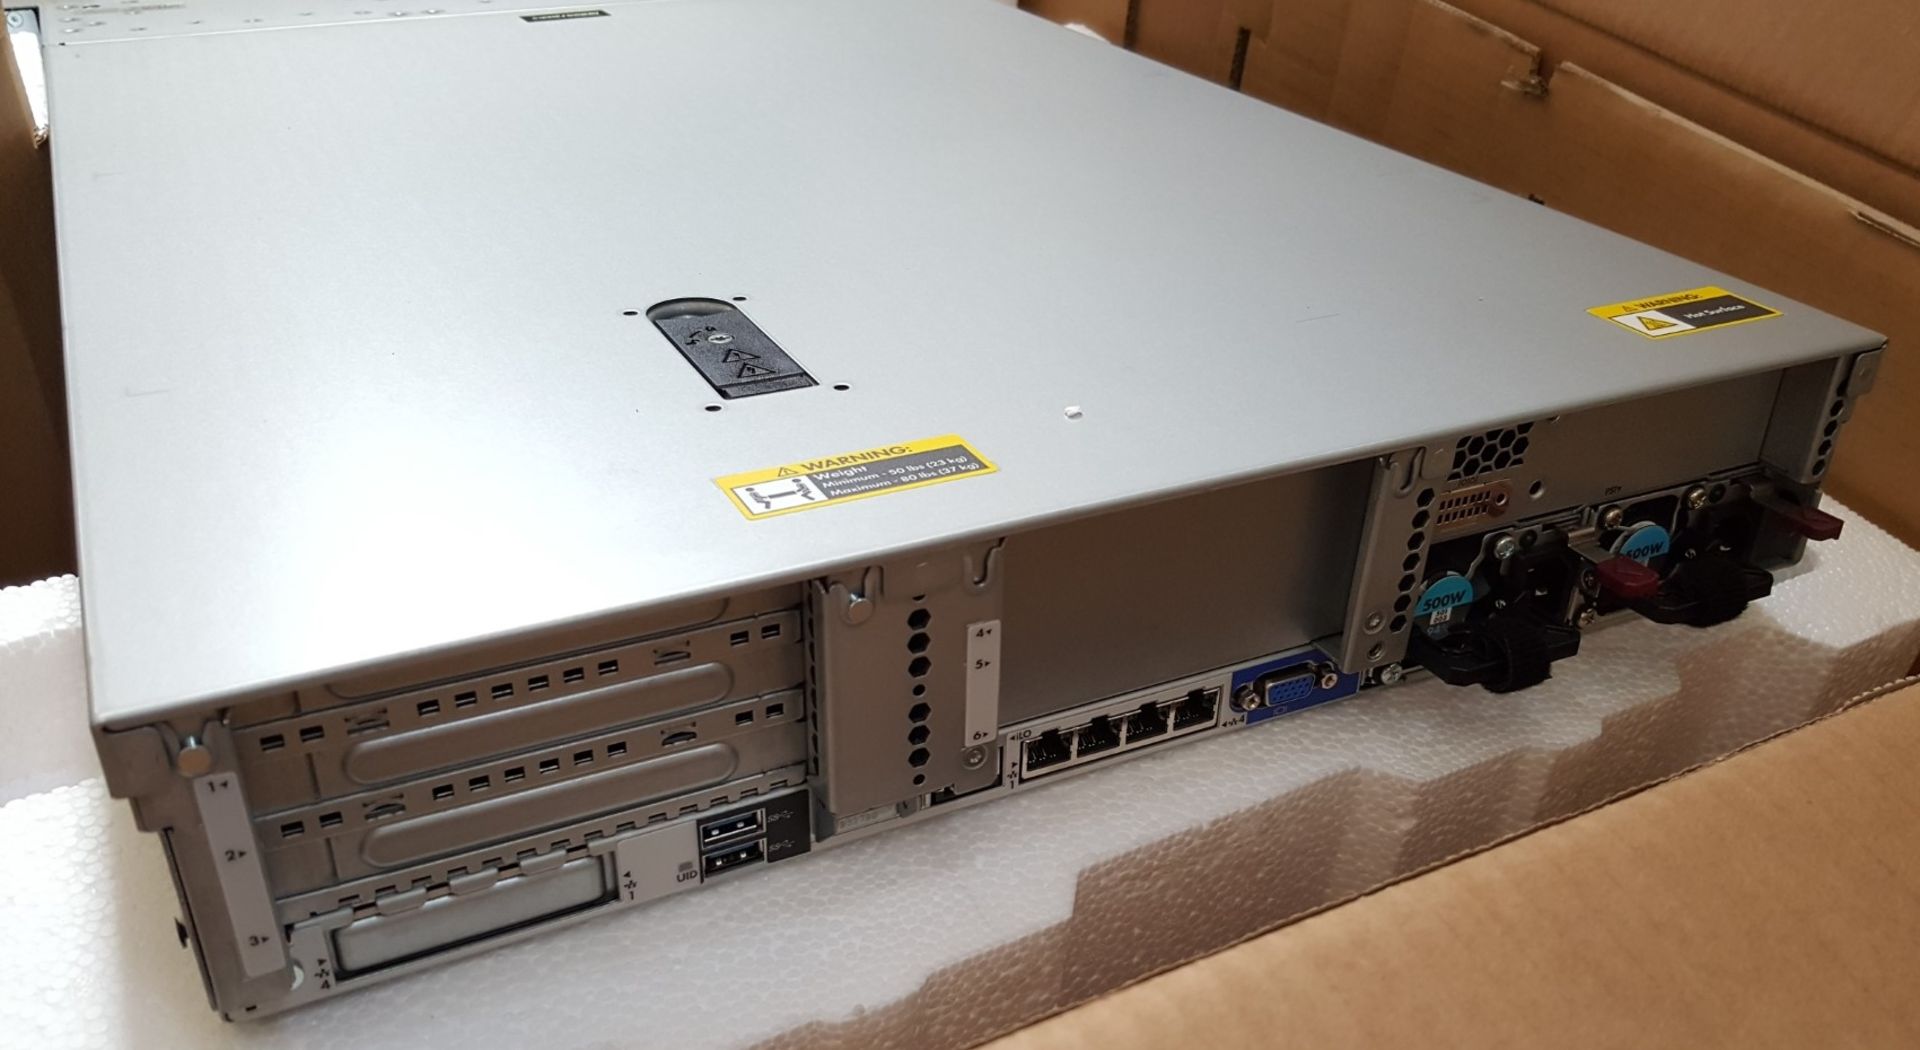 1 x HP ProLiant DL380 G9 Computer Server With Intel Xeon E5-2620V3 Six Core 2.4ghz Processor and - Image 5 of 5